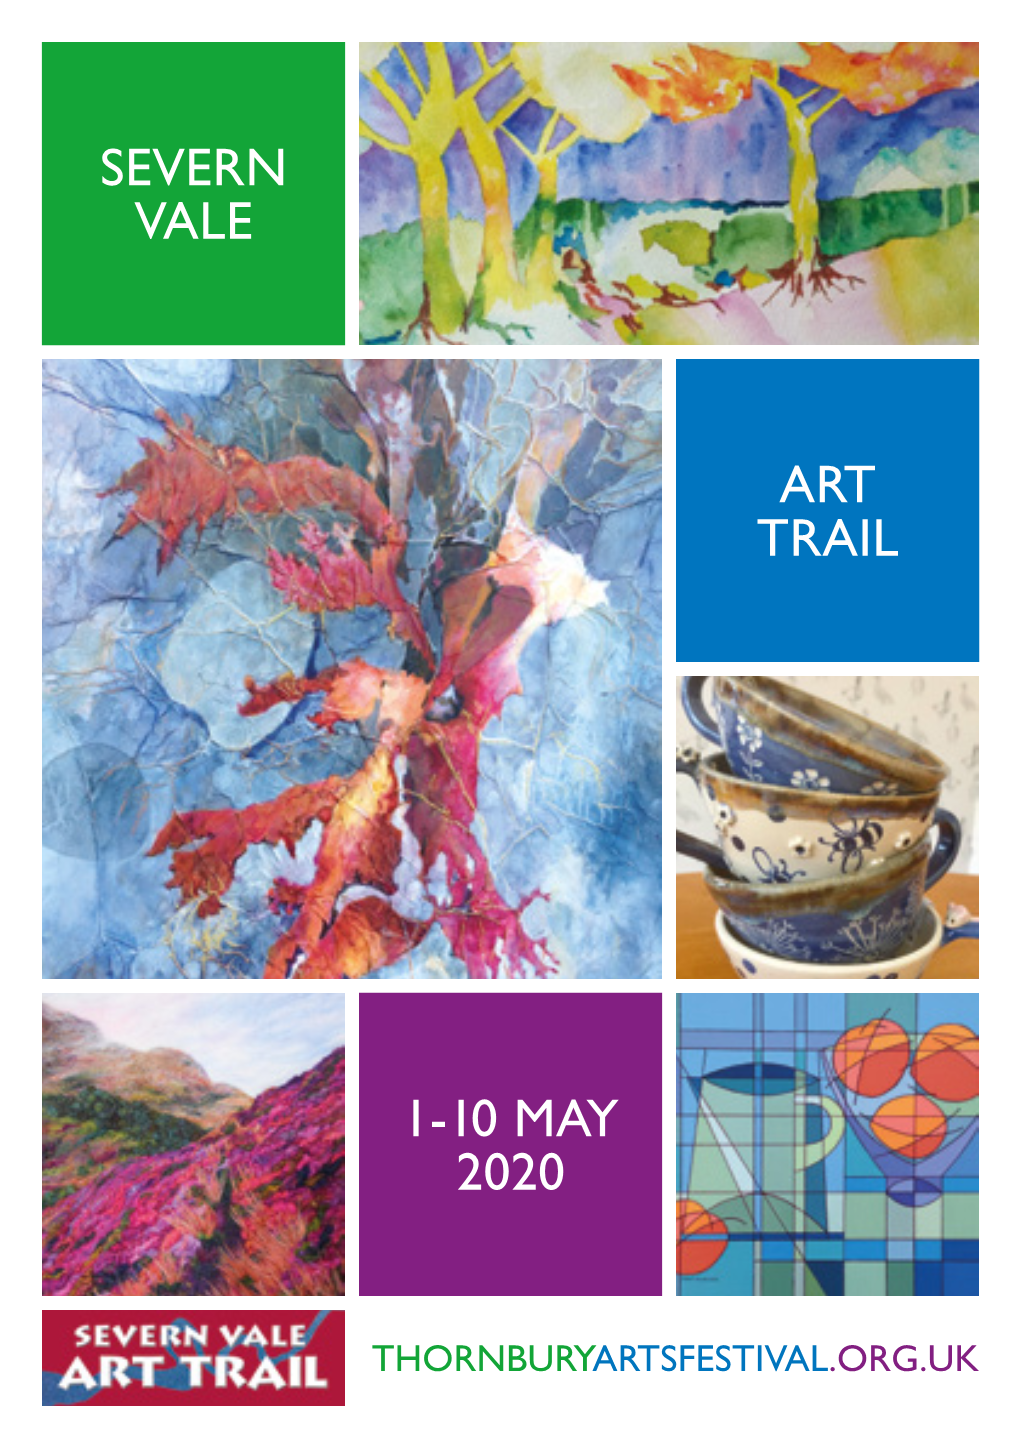 1-10 May 2020 Art Trail Severn Vale